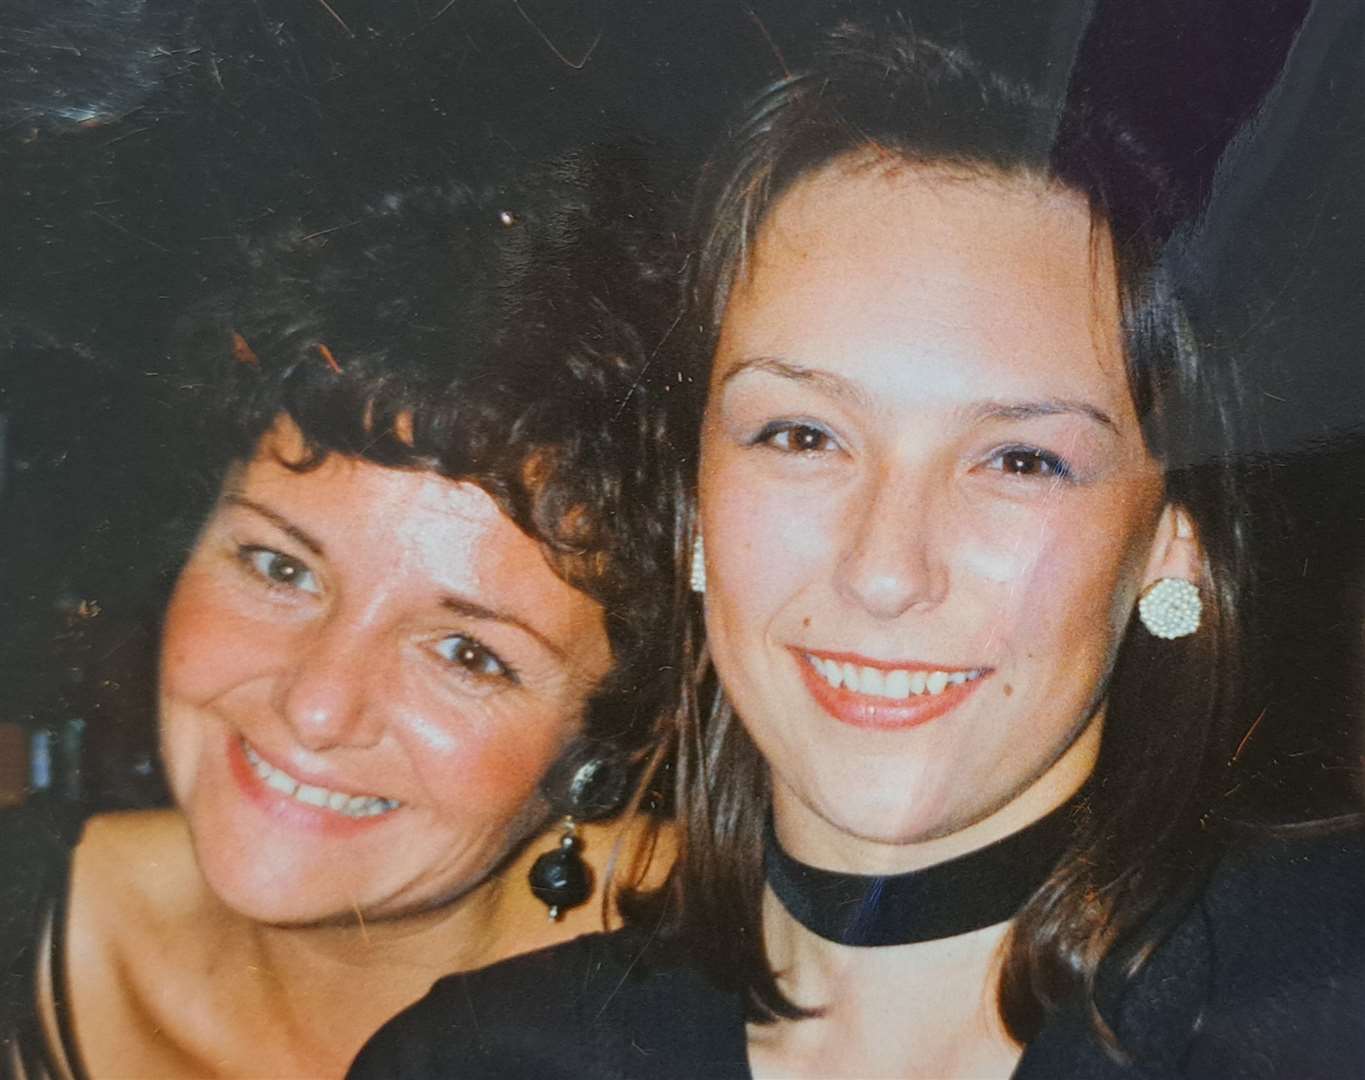 From left: Nicola Jordan and Kent Online senior news editor Nikki White, pictured at an Emap awards ceremony about 1993/94. The pair have worked with each other on and off for about 30 years at different media organisations